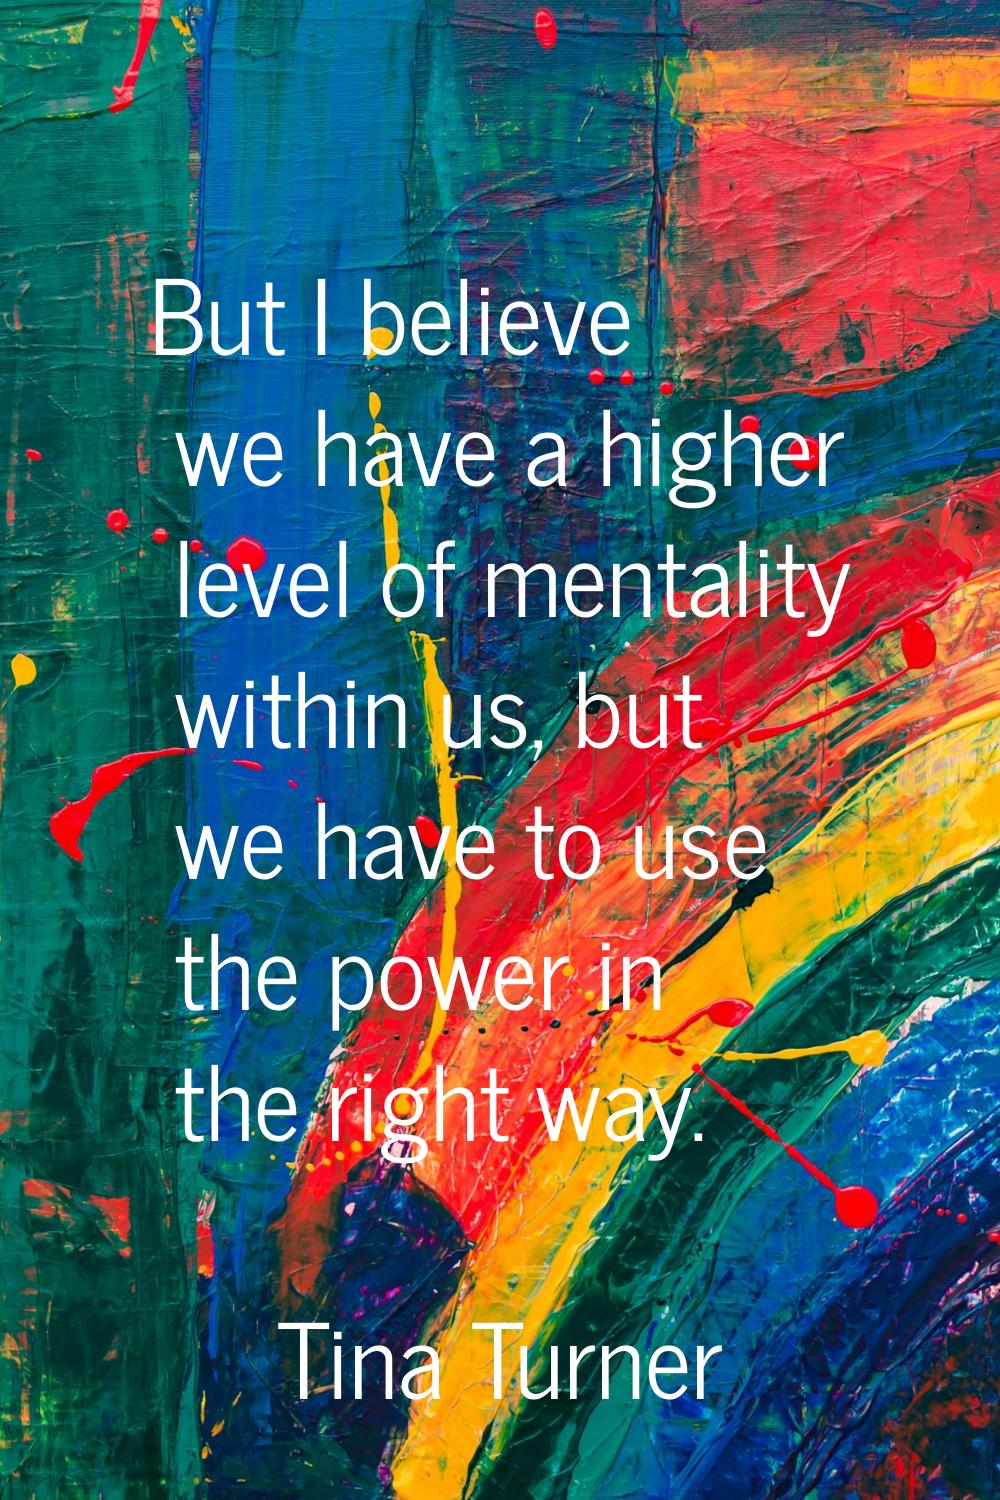 But I believe we have a higher level of mentality within us, but we have to use the power in the ri